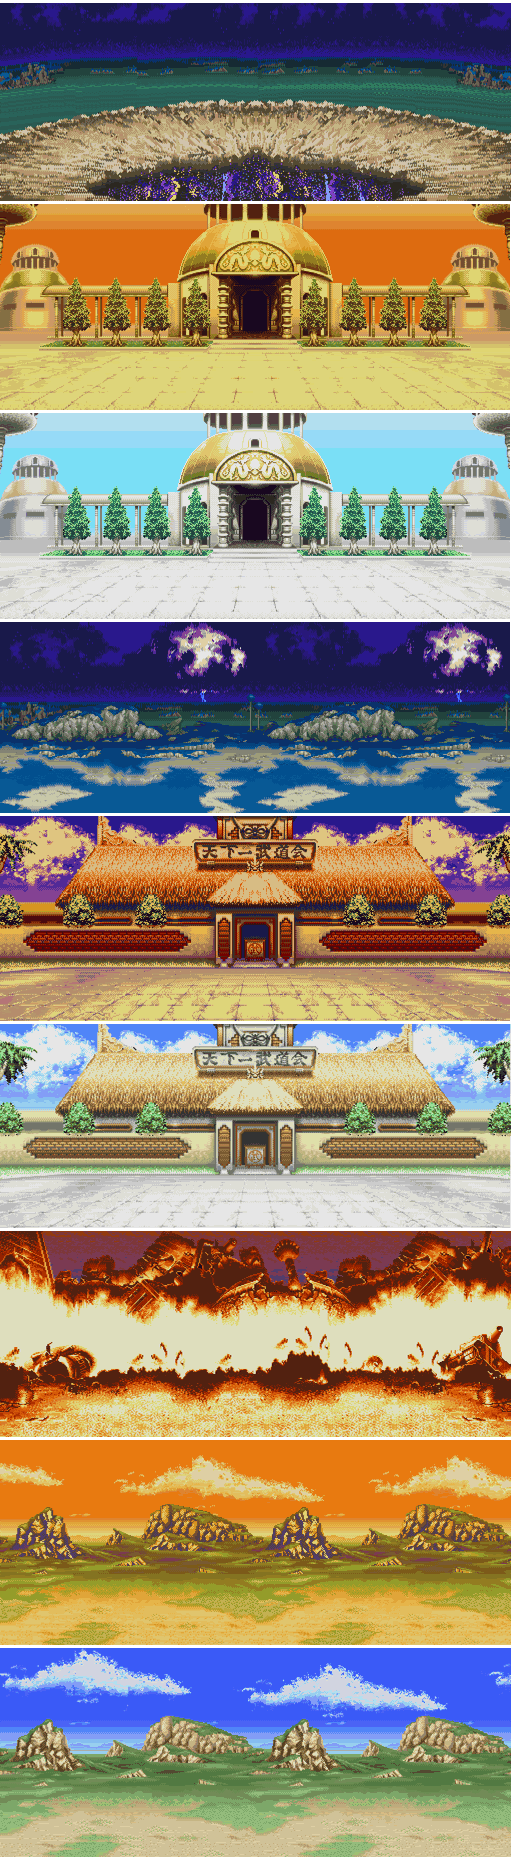 hyper dragon ball z stages